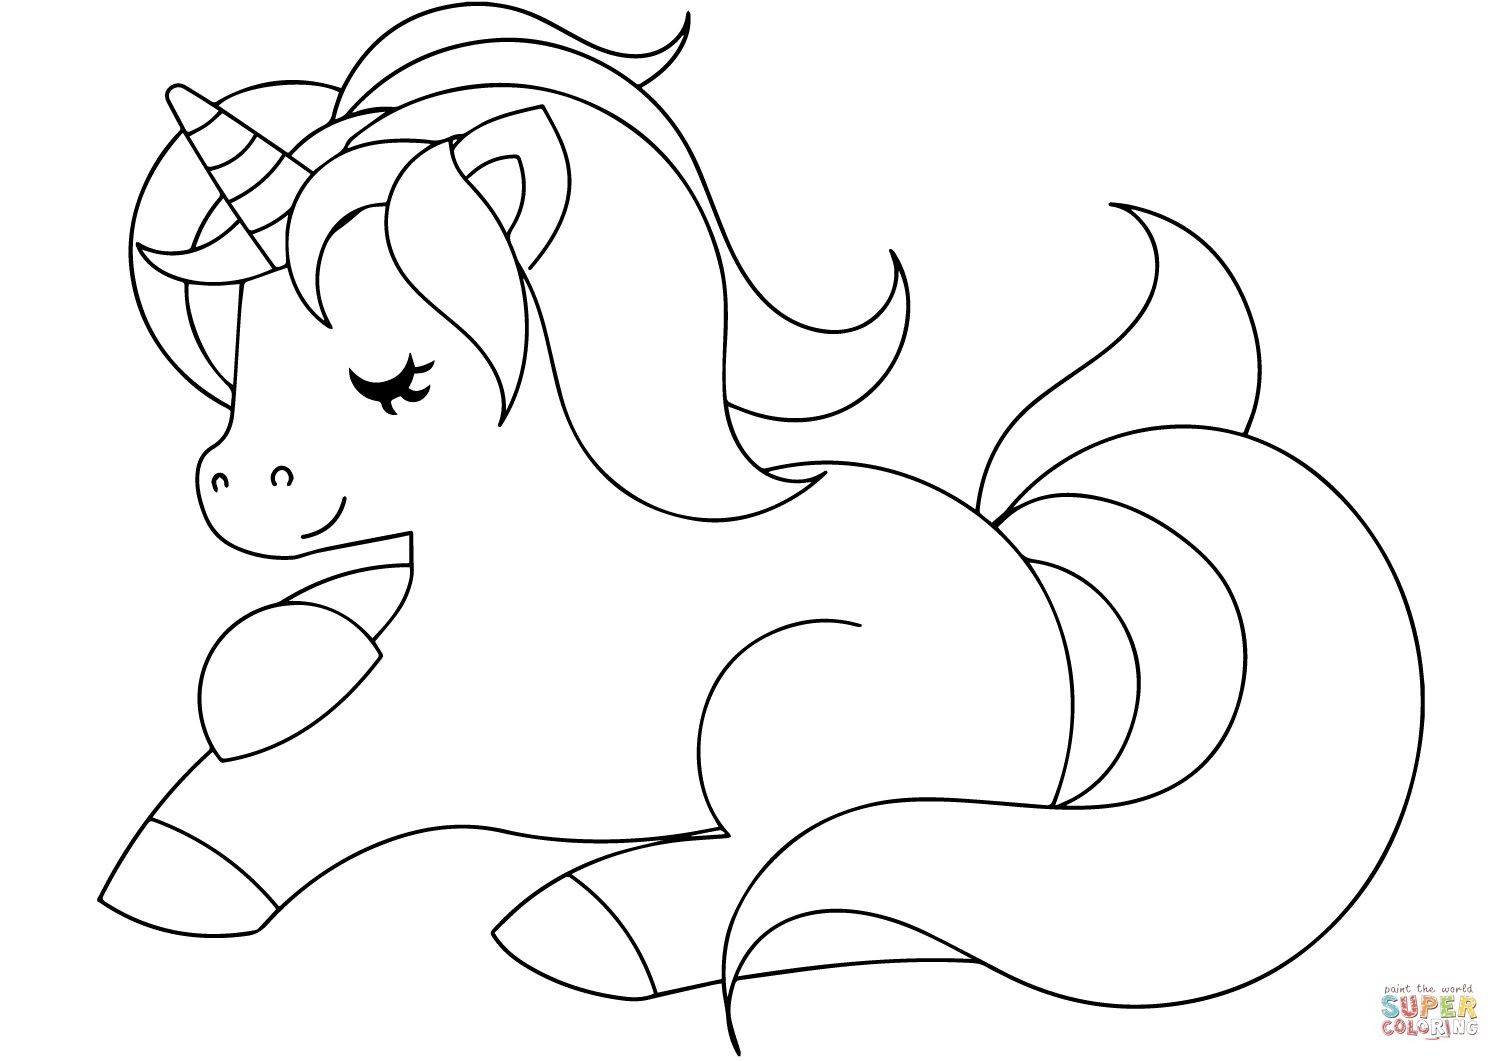 Printable Unicorn Coloring Pages
 Cute Unicorn Coloring Page